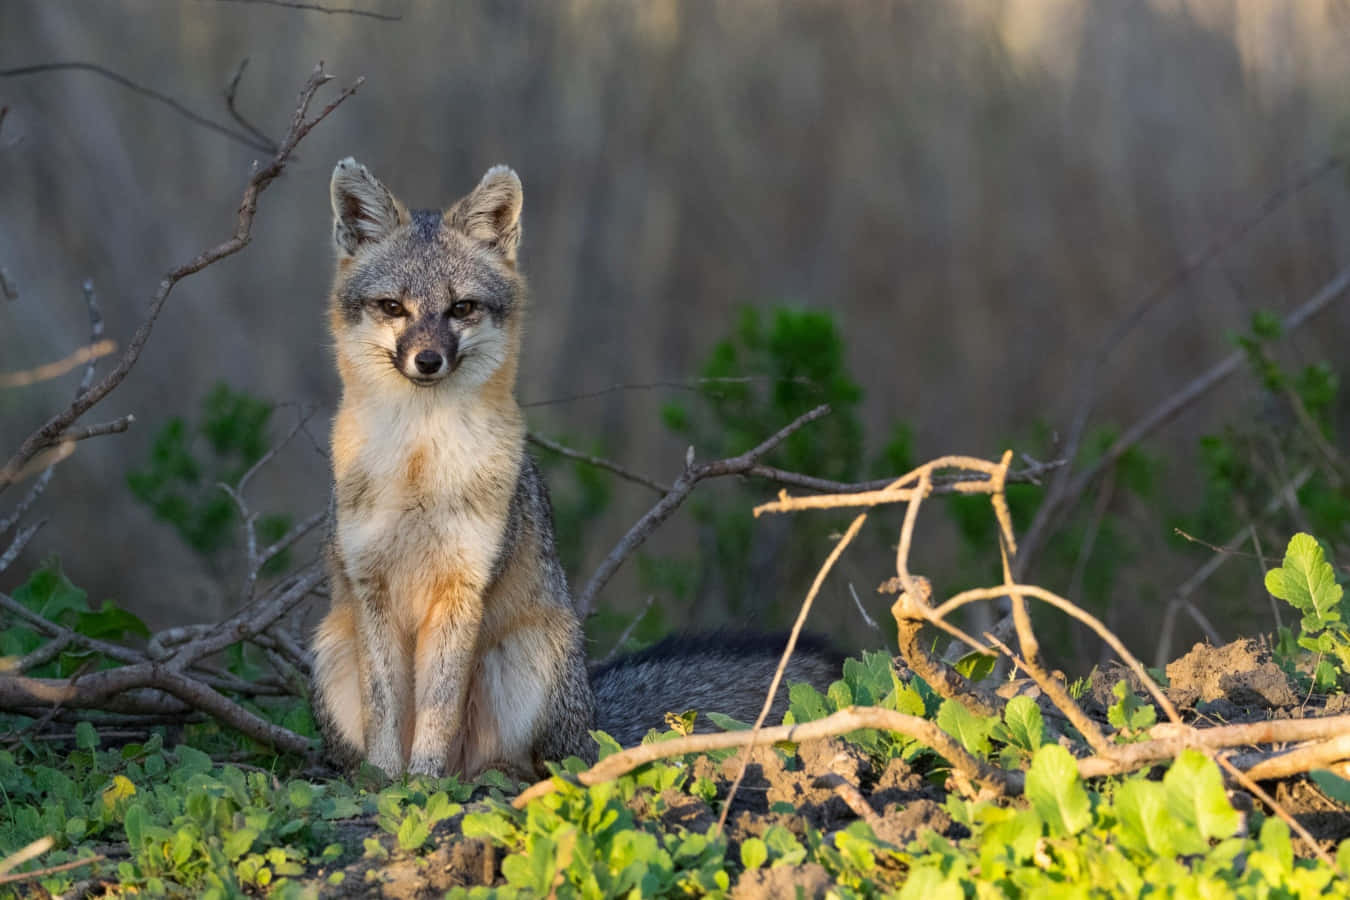 A close shot of a beautiful Gray Fox perched on a rock